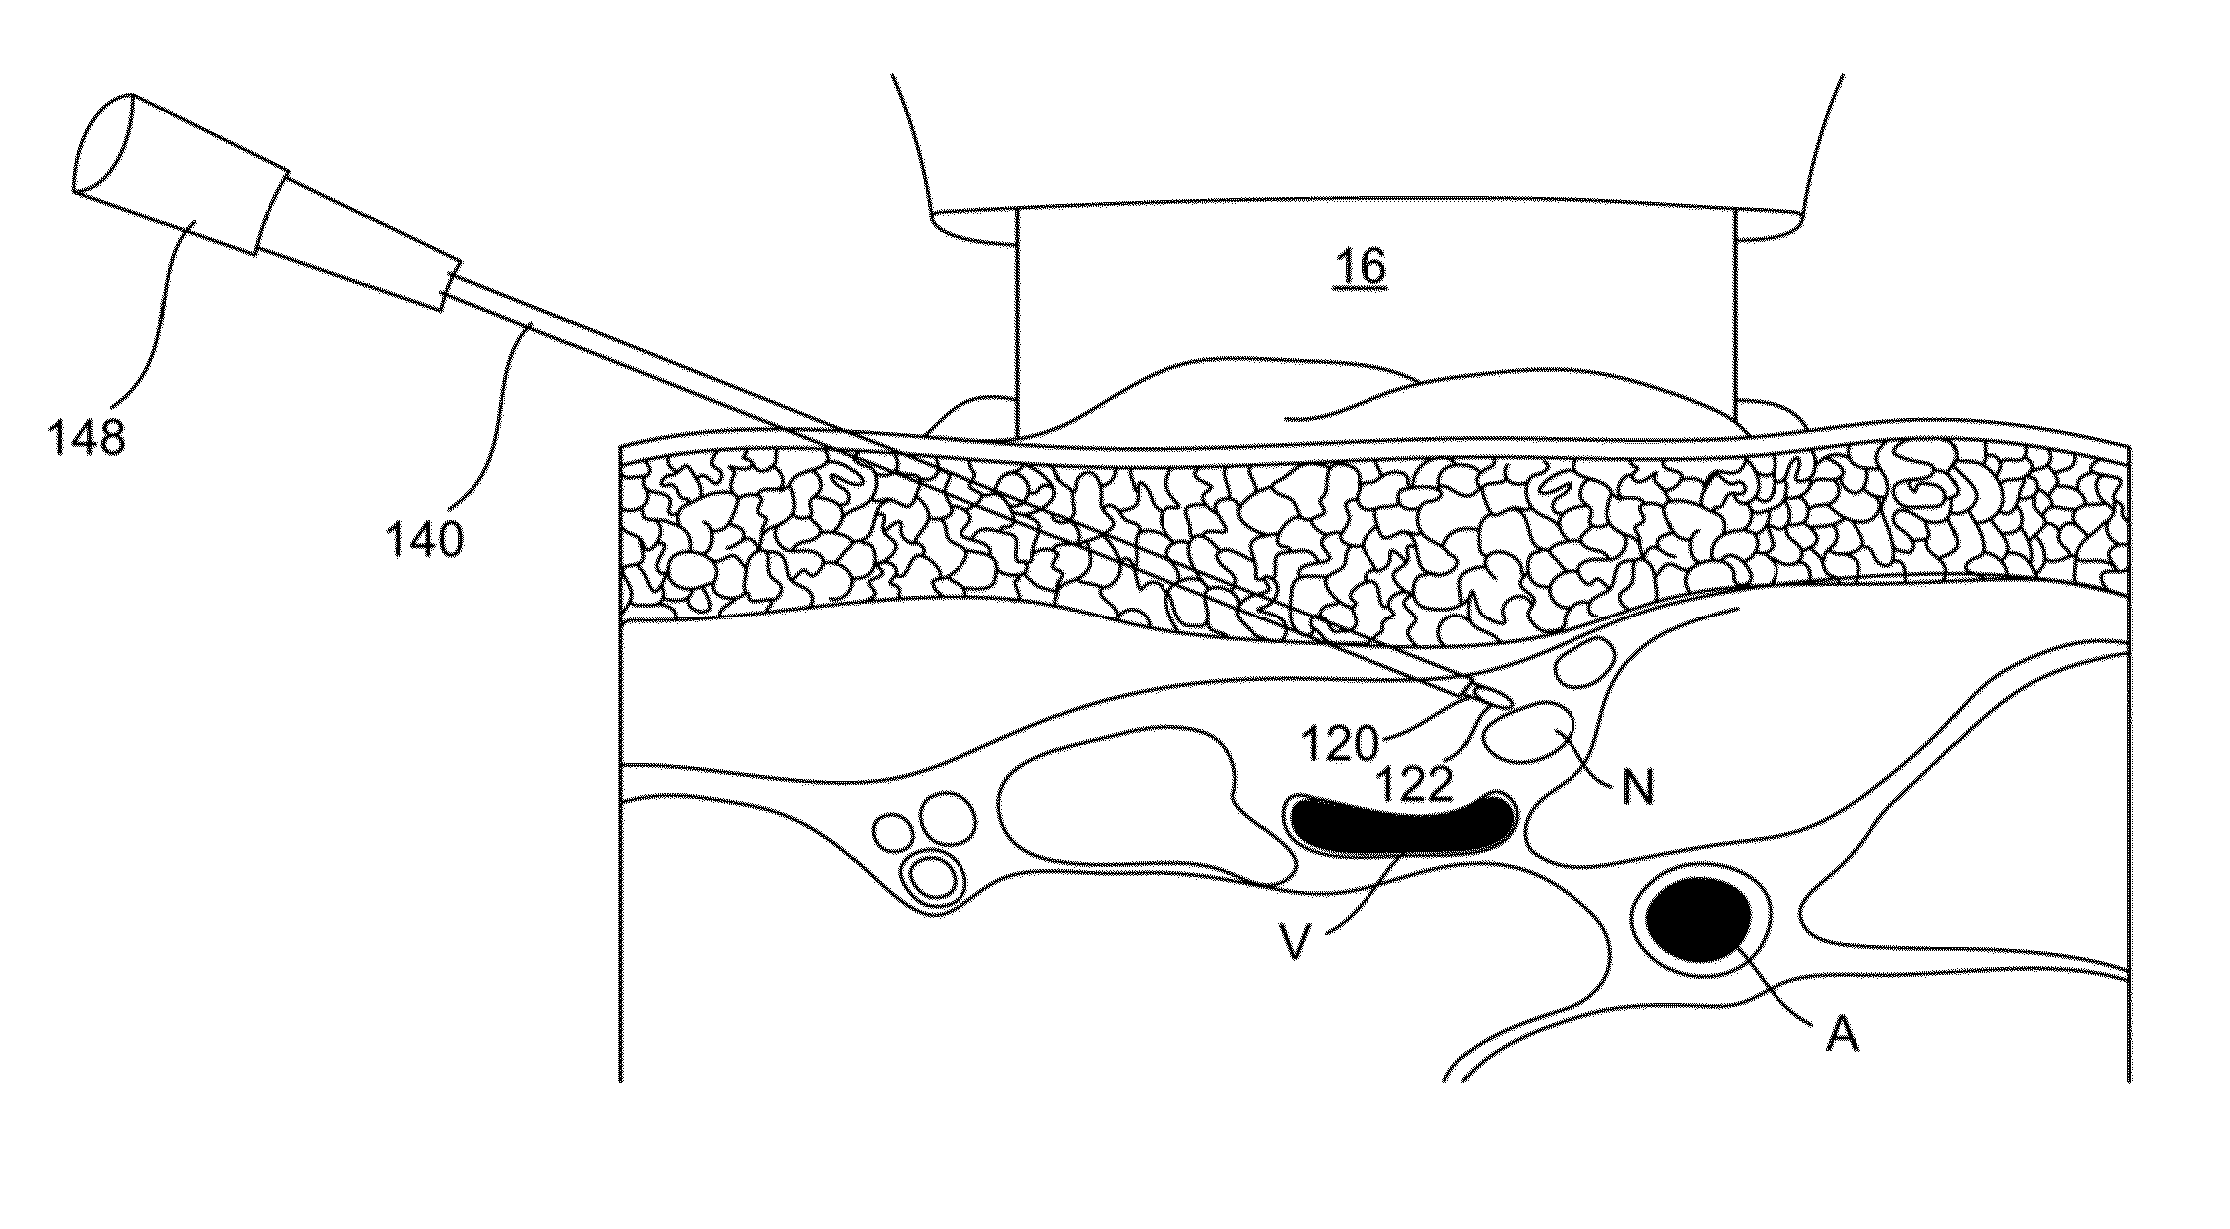 Neuro-vasculature access system and device